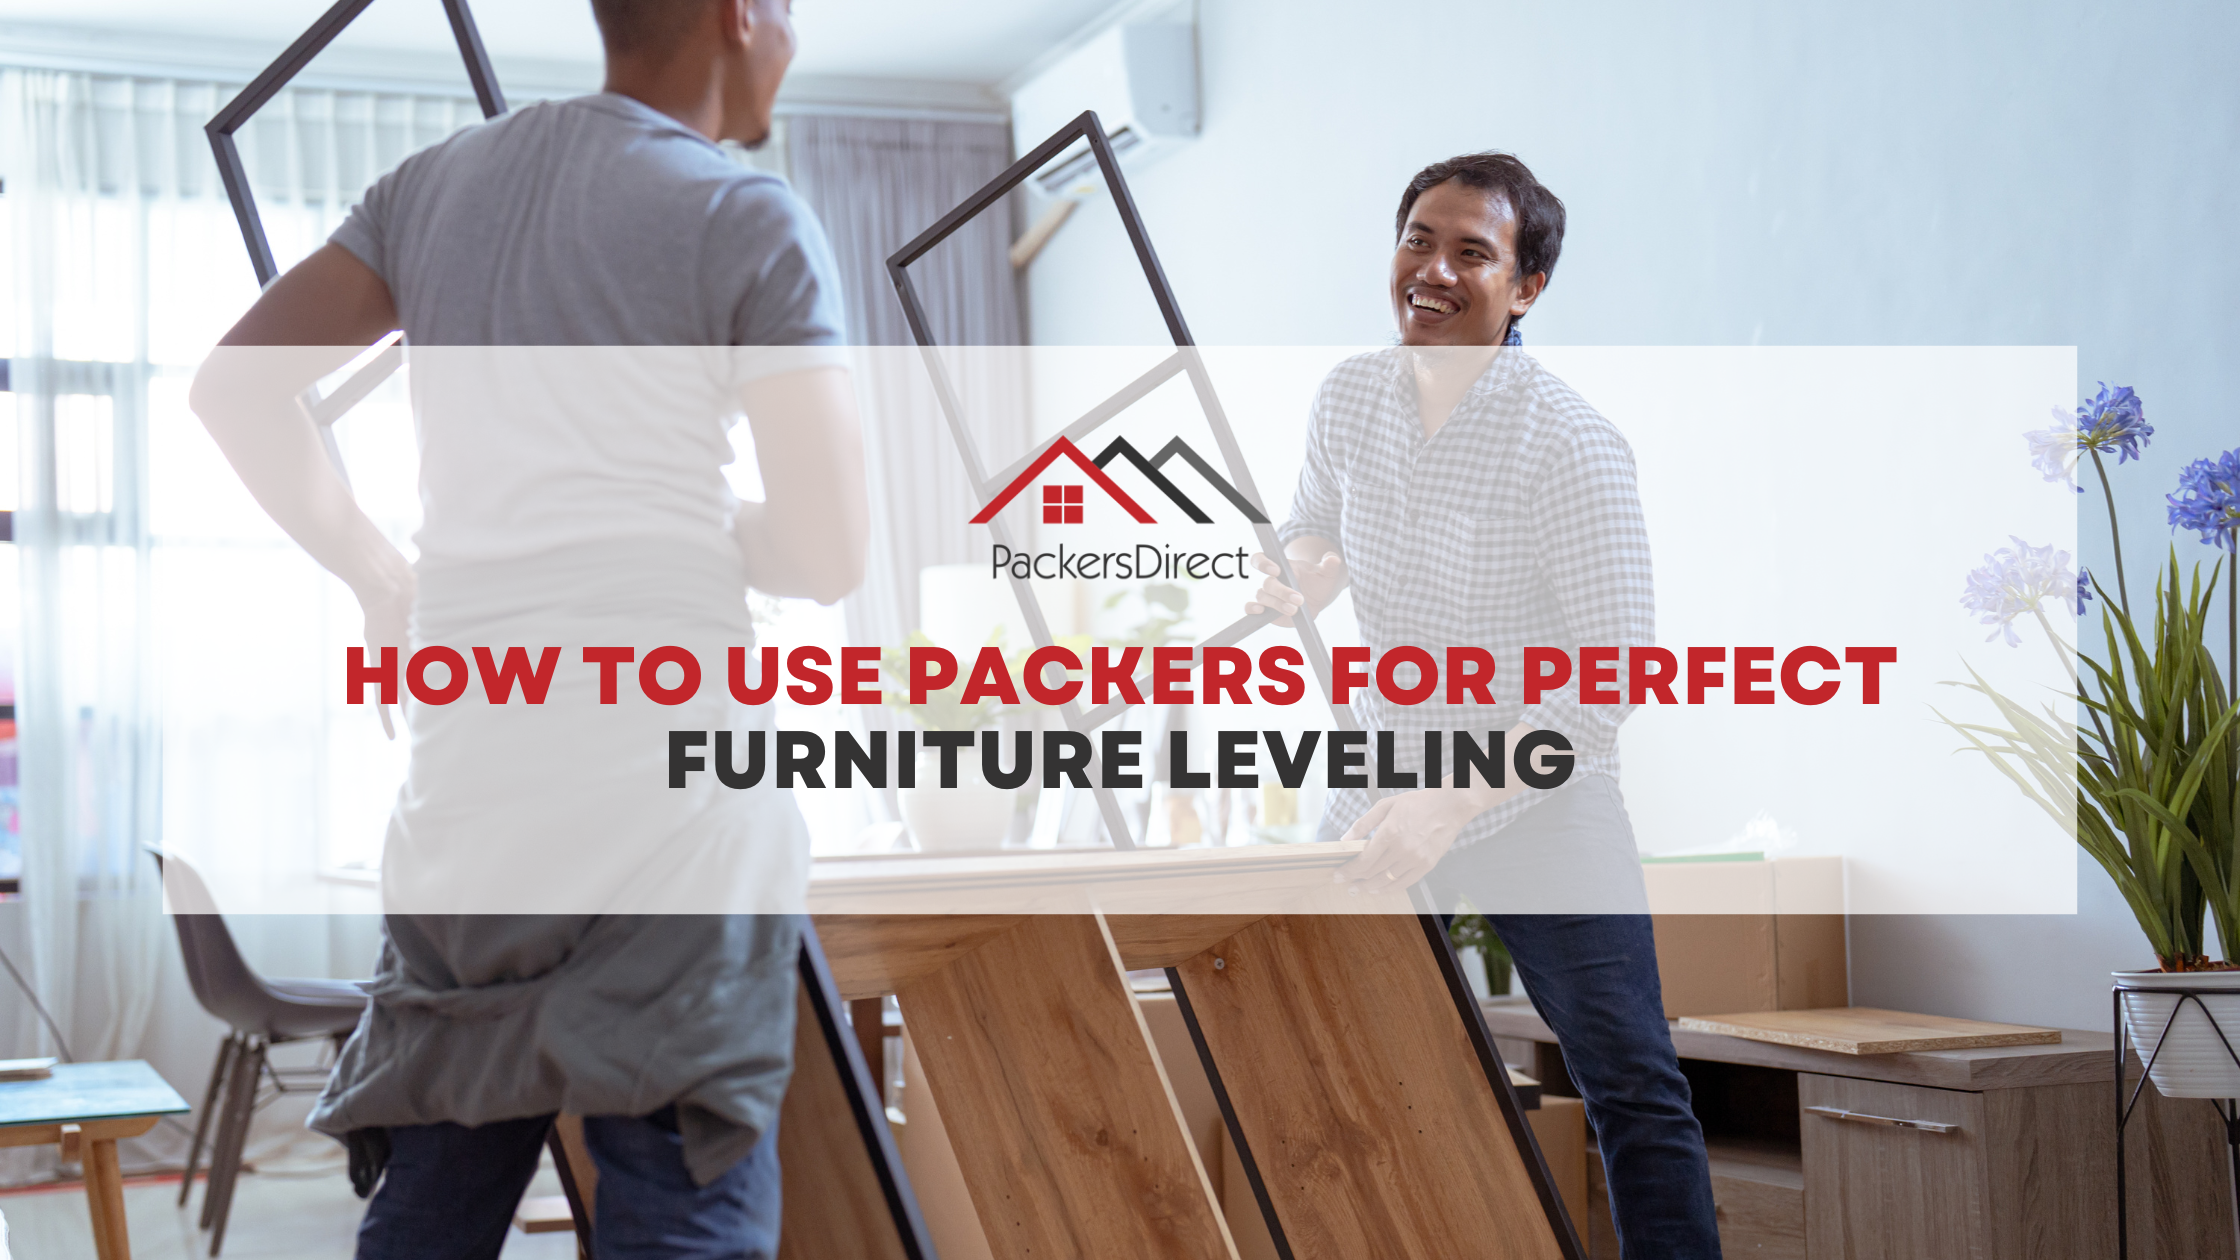 How to Use Packers for Perfect Furniture Leveling